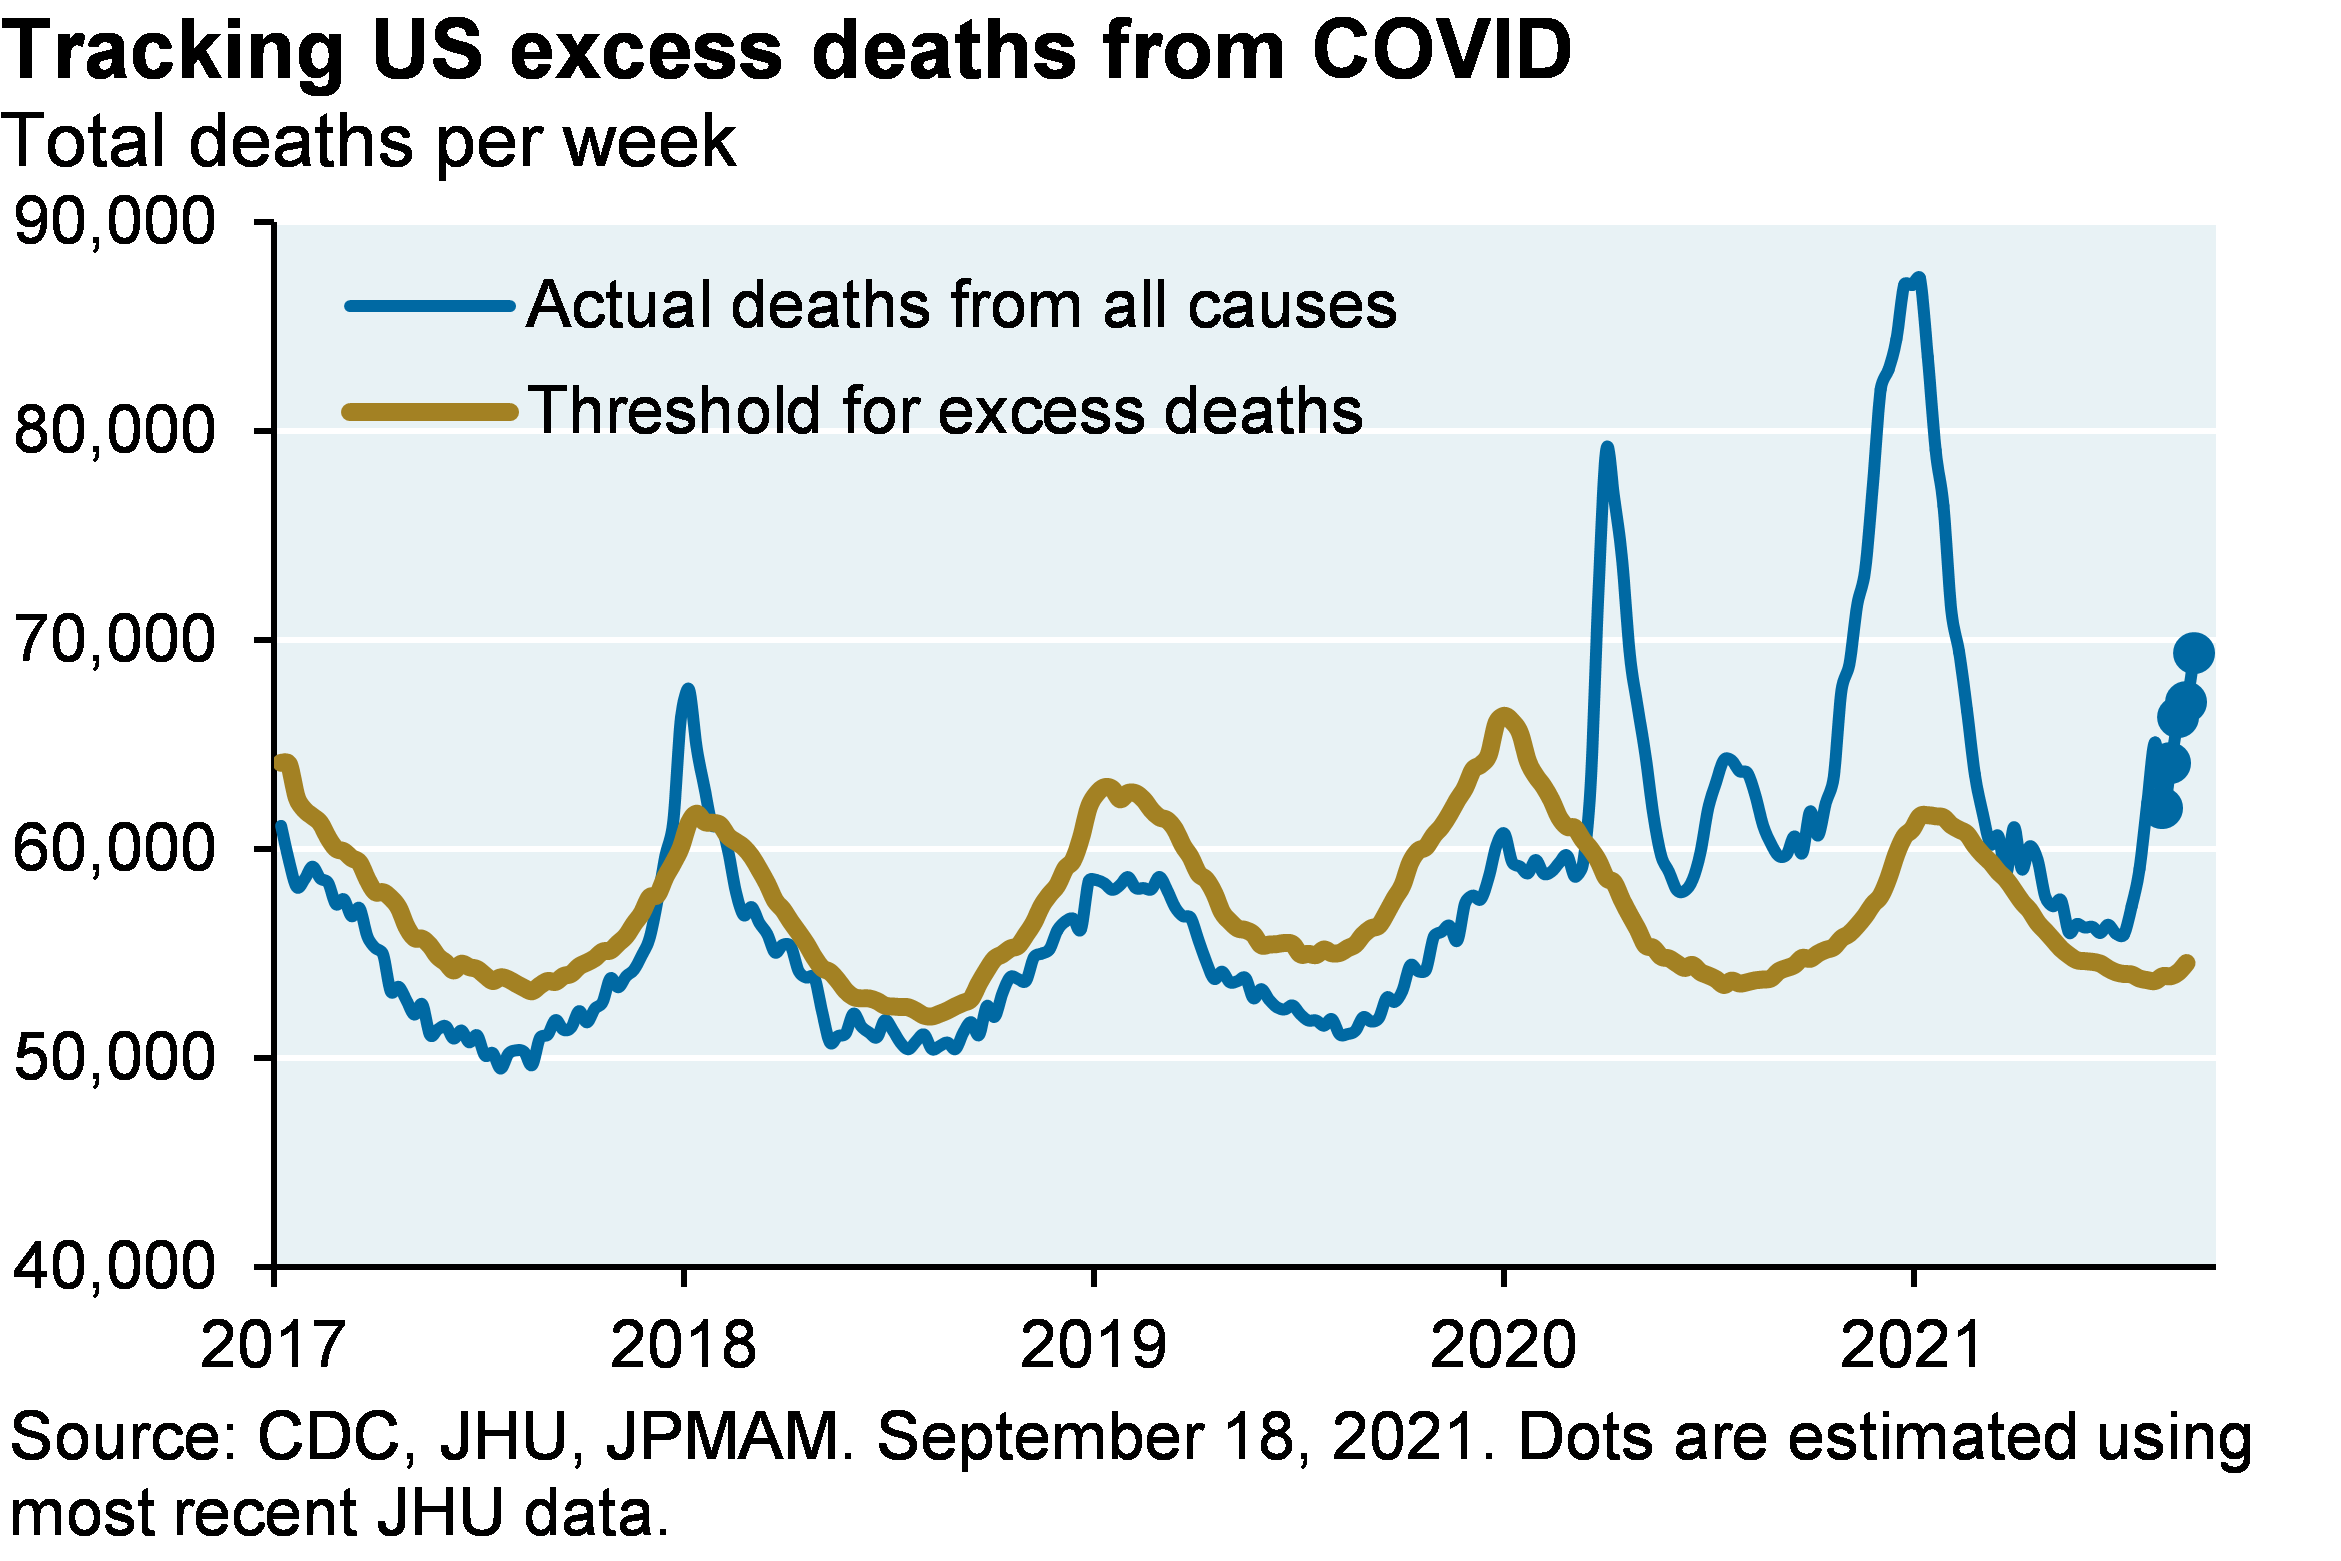 Line chart shows actual deaths per week from all causes vs the threshold for excess deaths from 2017 to 2021. Actual deaths from all causes were below the threshold from 2017 to the start of COVID, with the exception of a brief spike in 2018. Actual deaths from all causes spiked at the end of 2020 at about 90,000 before dropping to the threshold. Recently, however, actual deaths have started to pick up again and are well above seasonal trends (about 70,000 actual deaths per week)